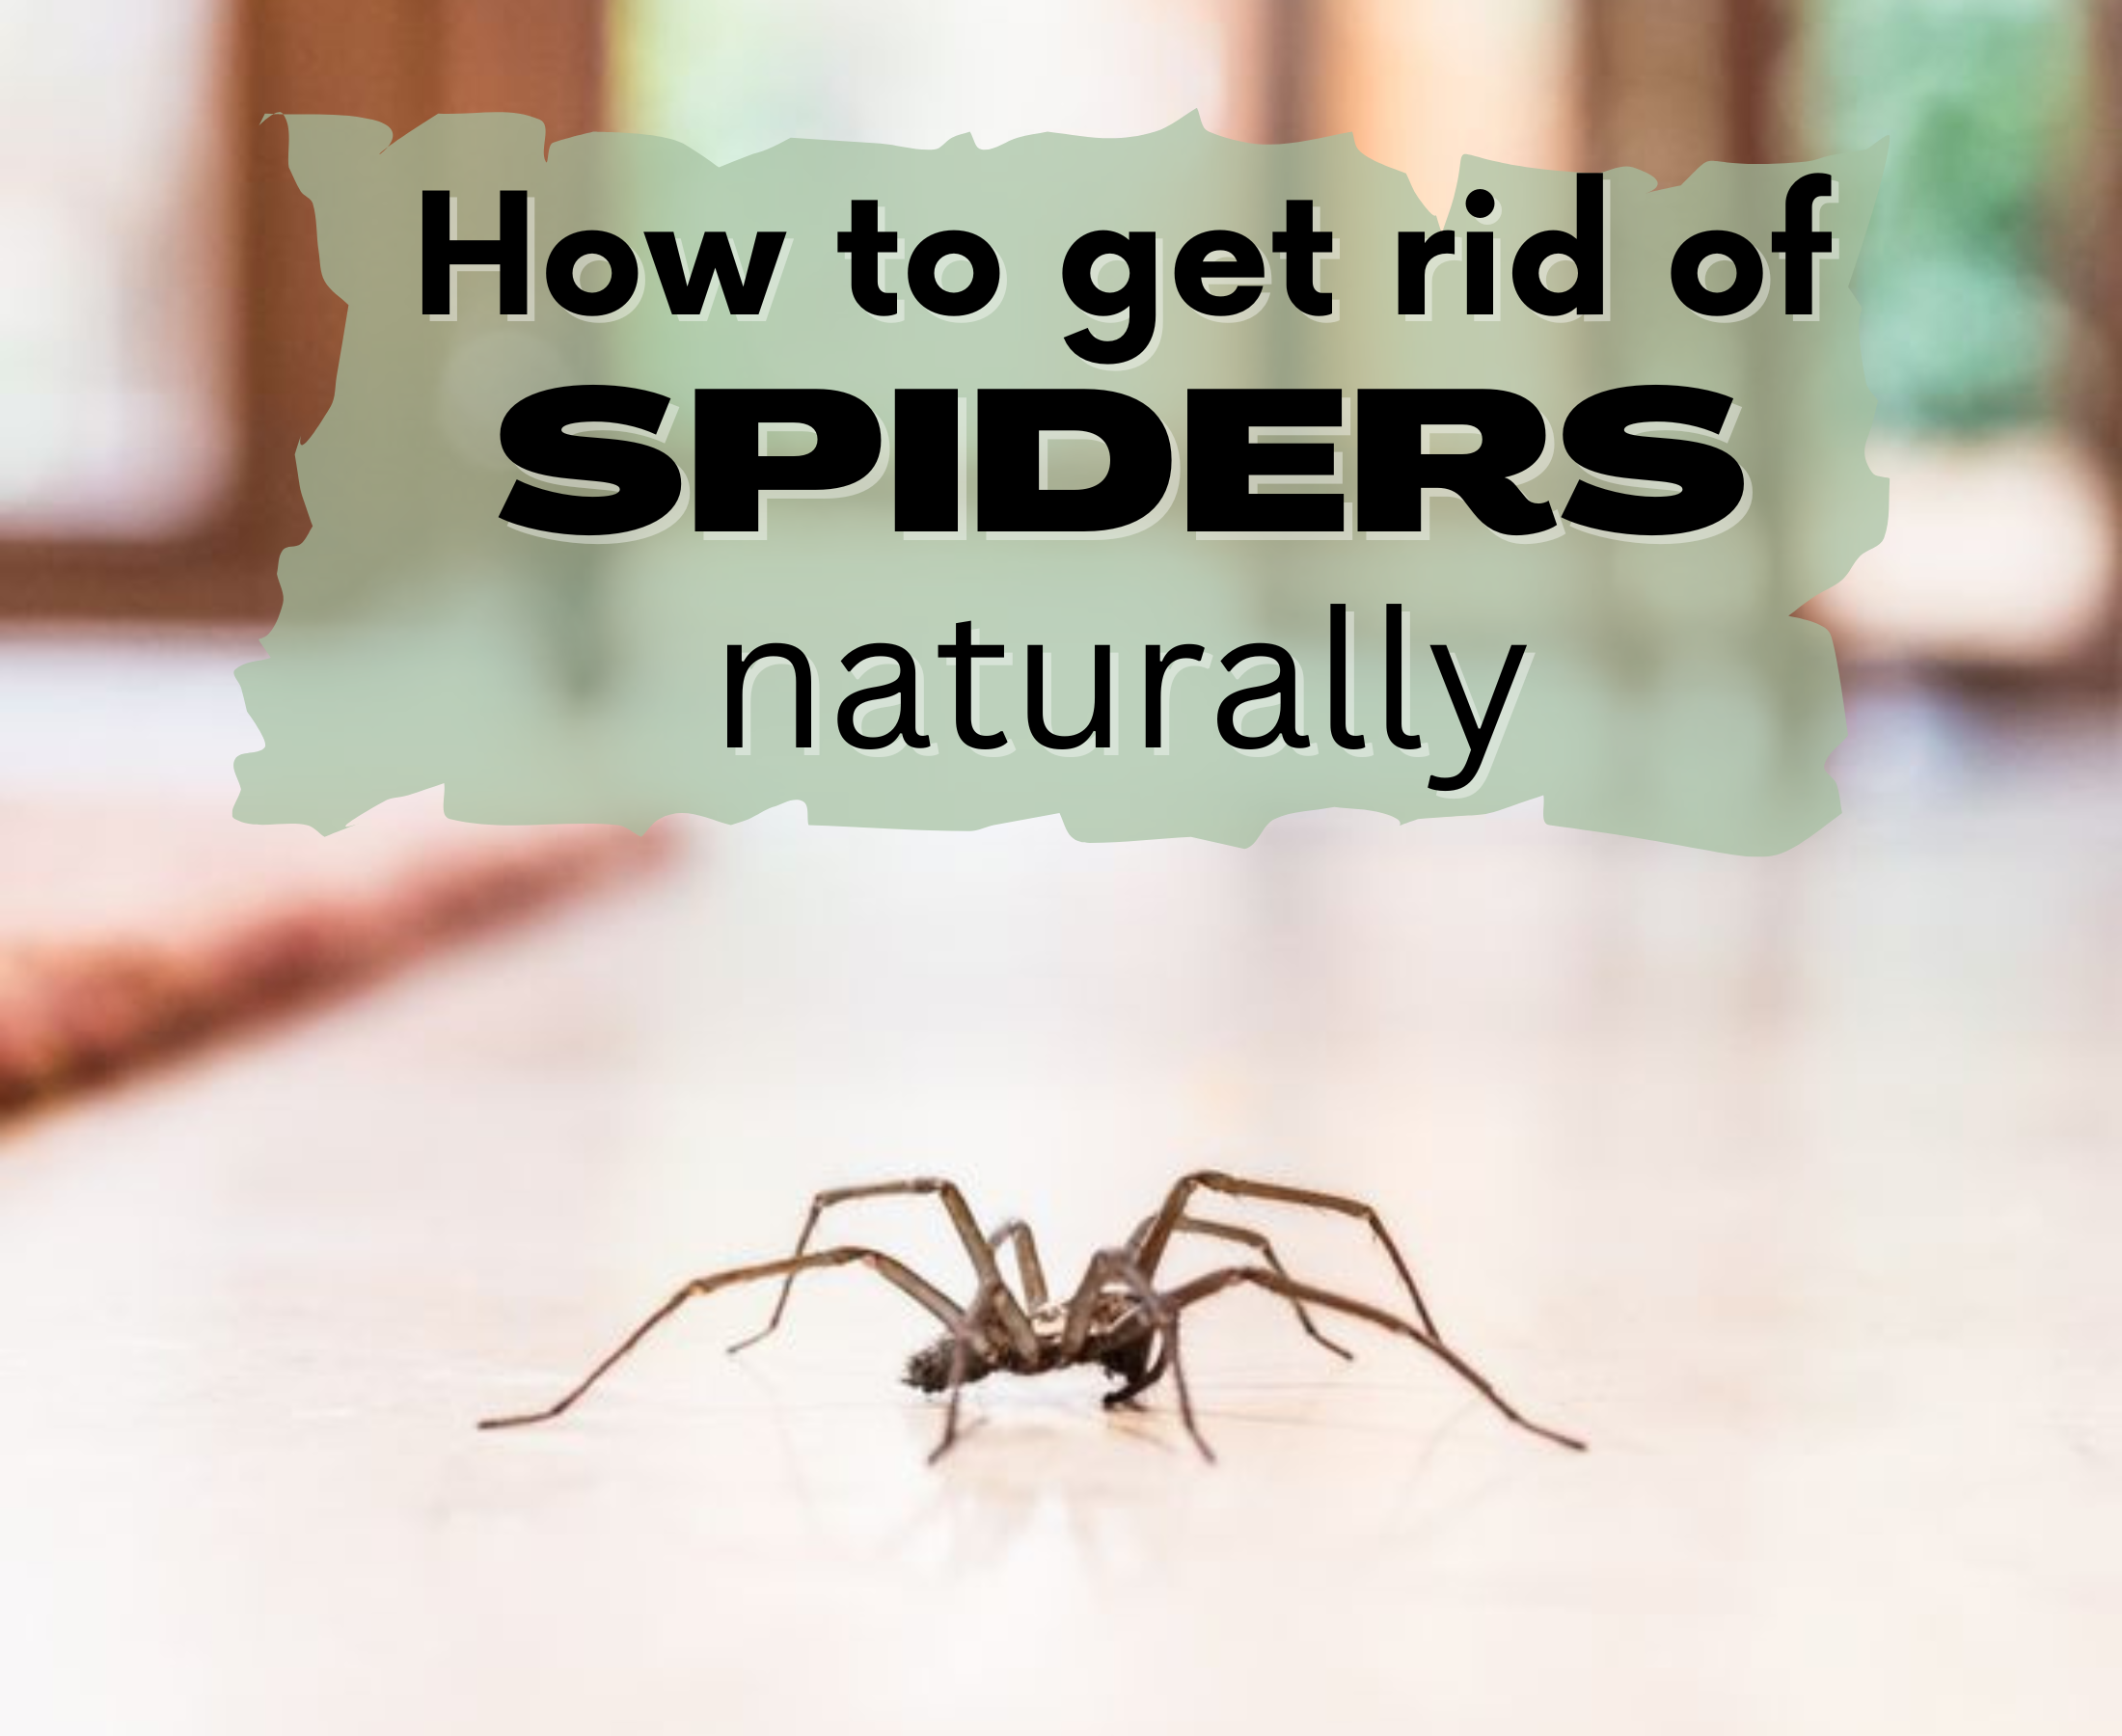 What scent will keep the spiders away?